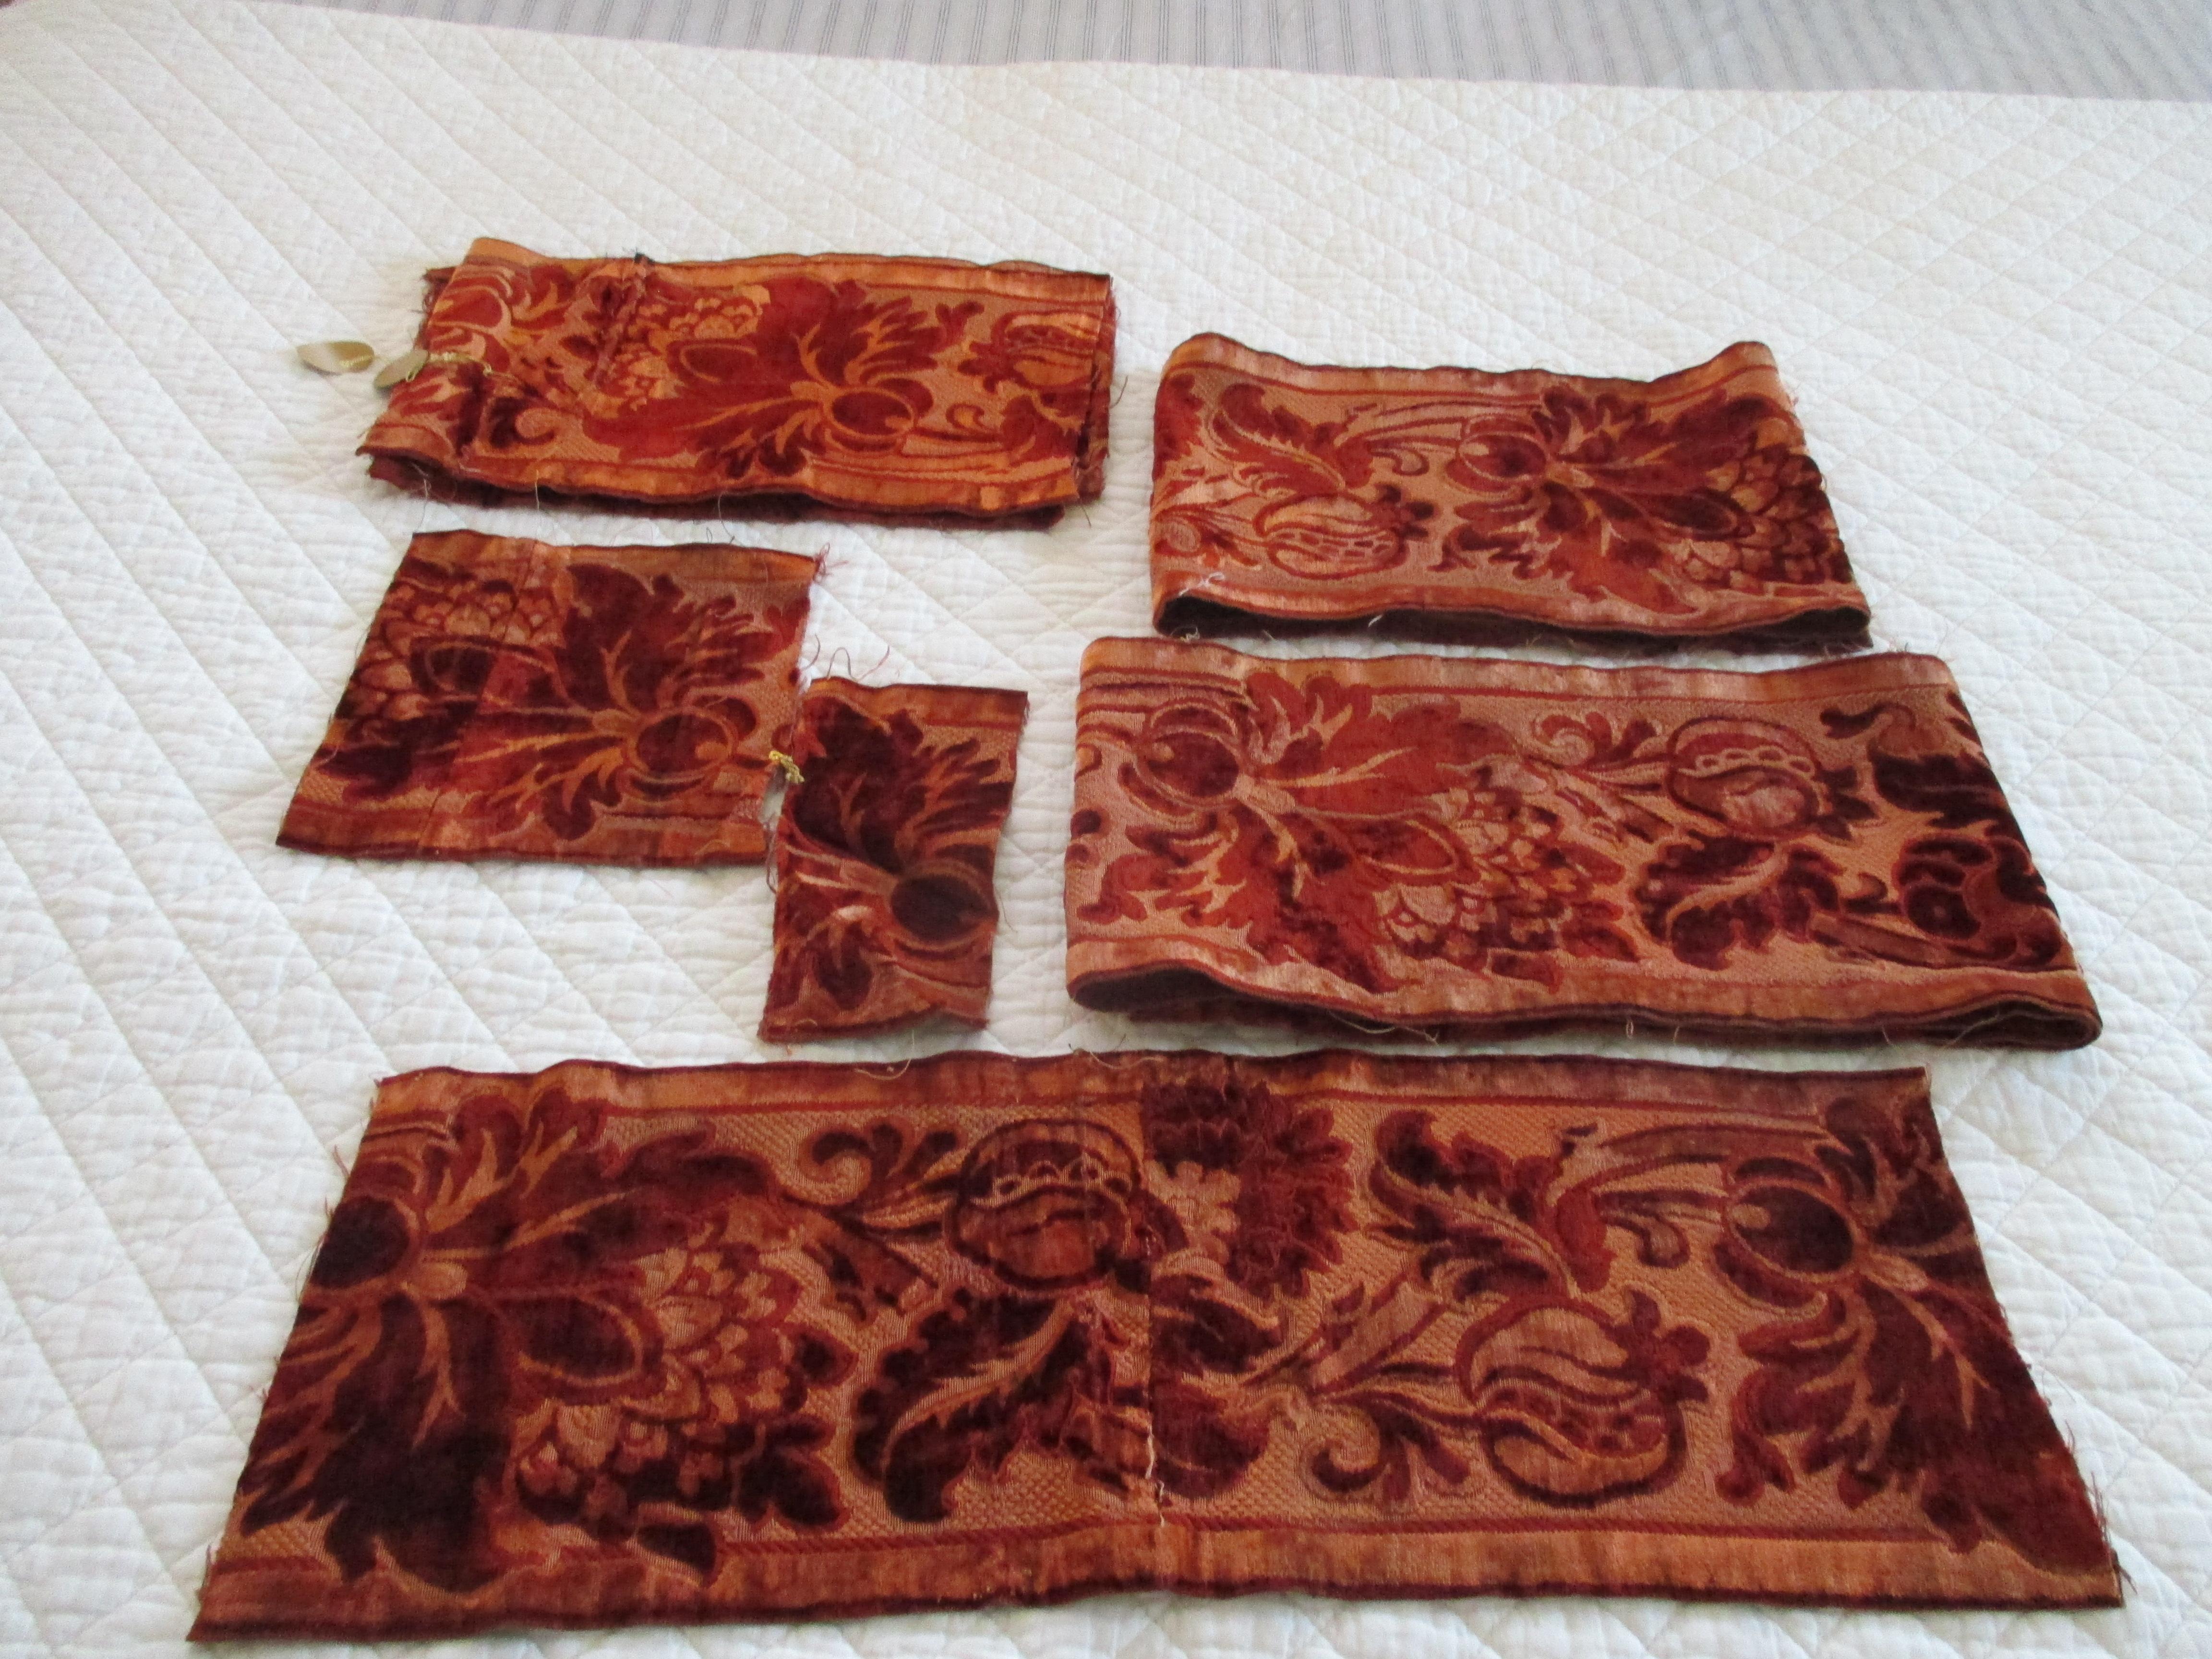 Antique burnt orange Gaufrage velvet trims.
Ideal for pillows or upholstery.
Sold as is.
Lot of trims:
Sizes from 9 x 7
9 x 7
26 x7
48 x 7
54 x 7
20 x 7.